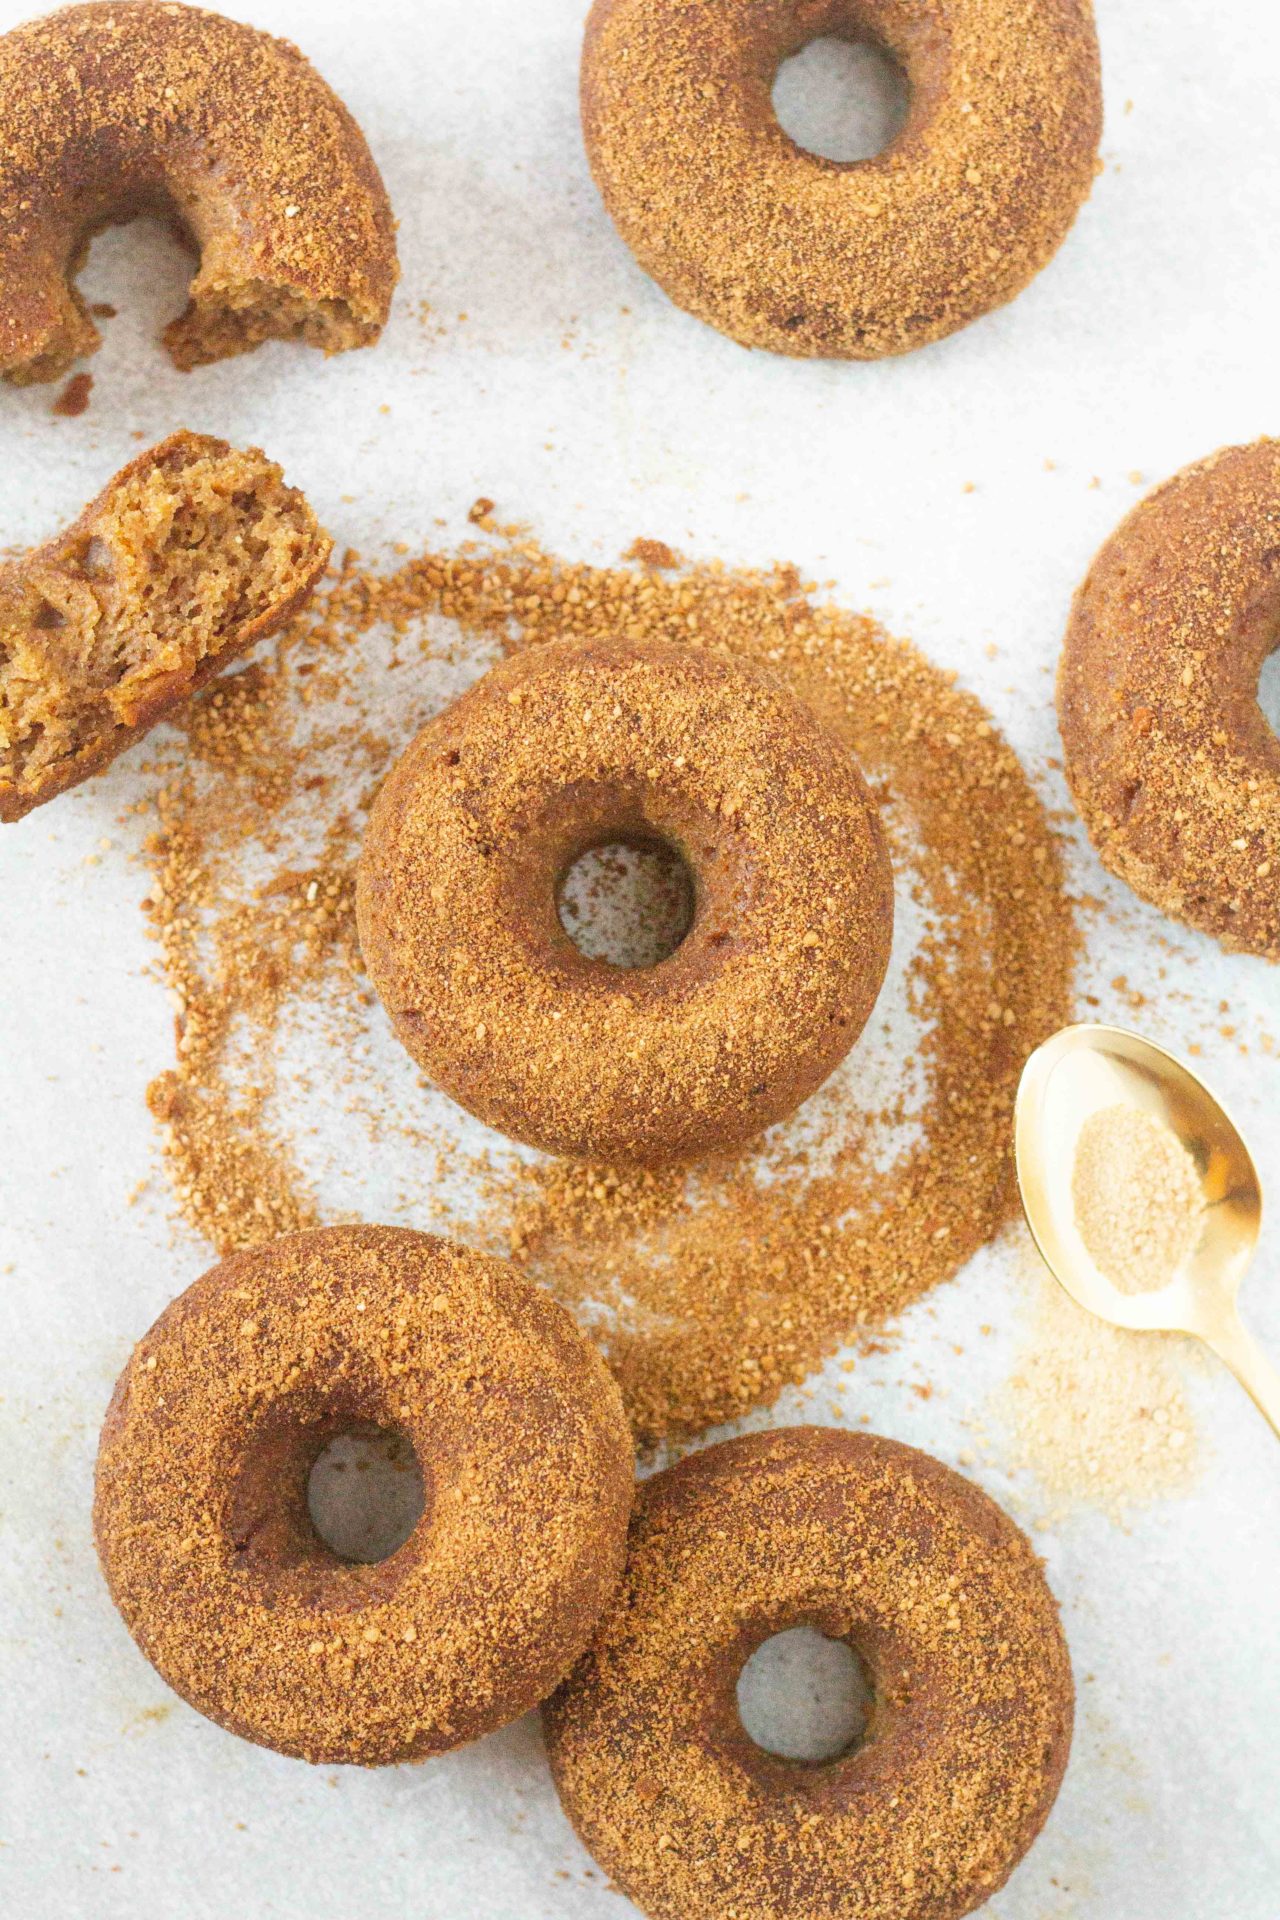 apple cider donuts with sugar